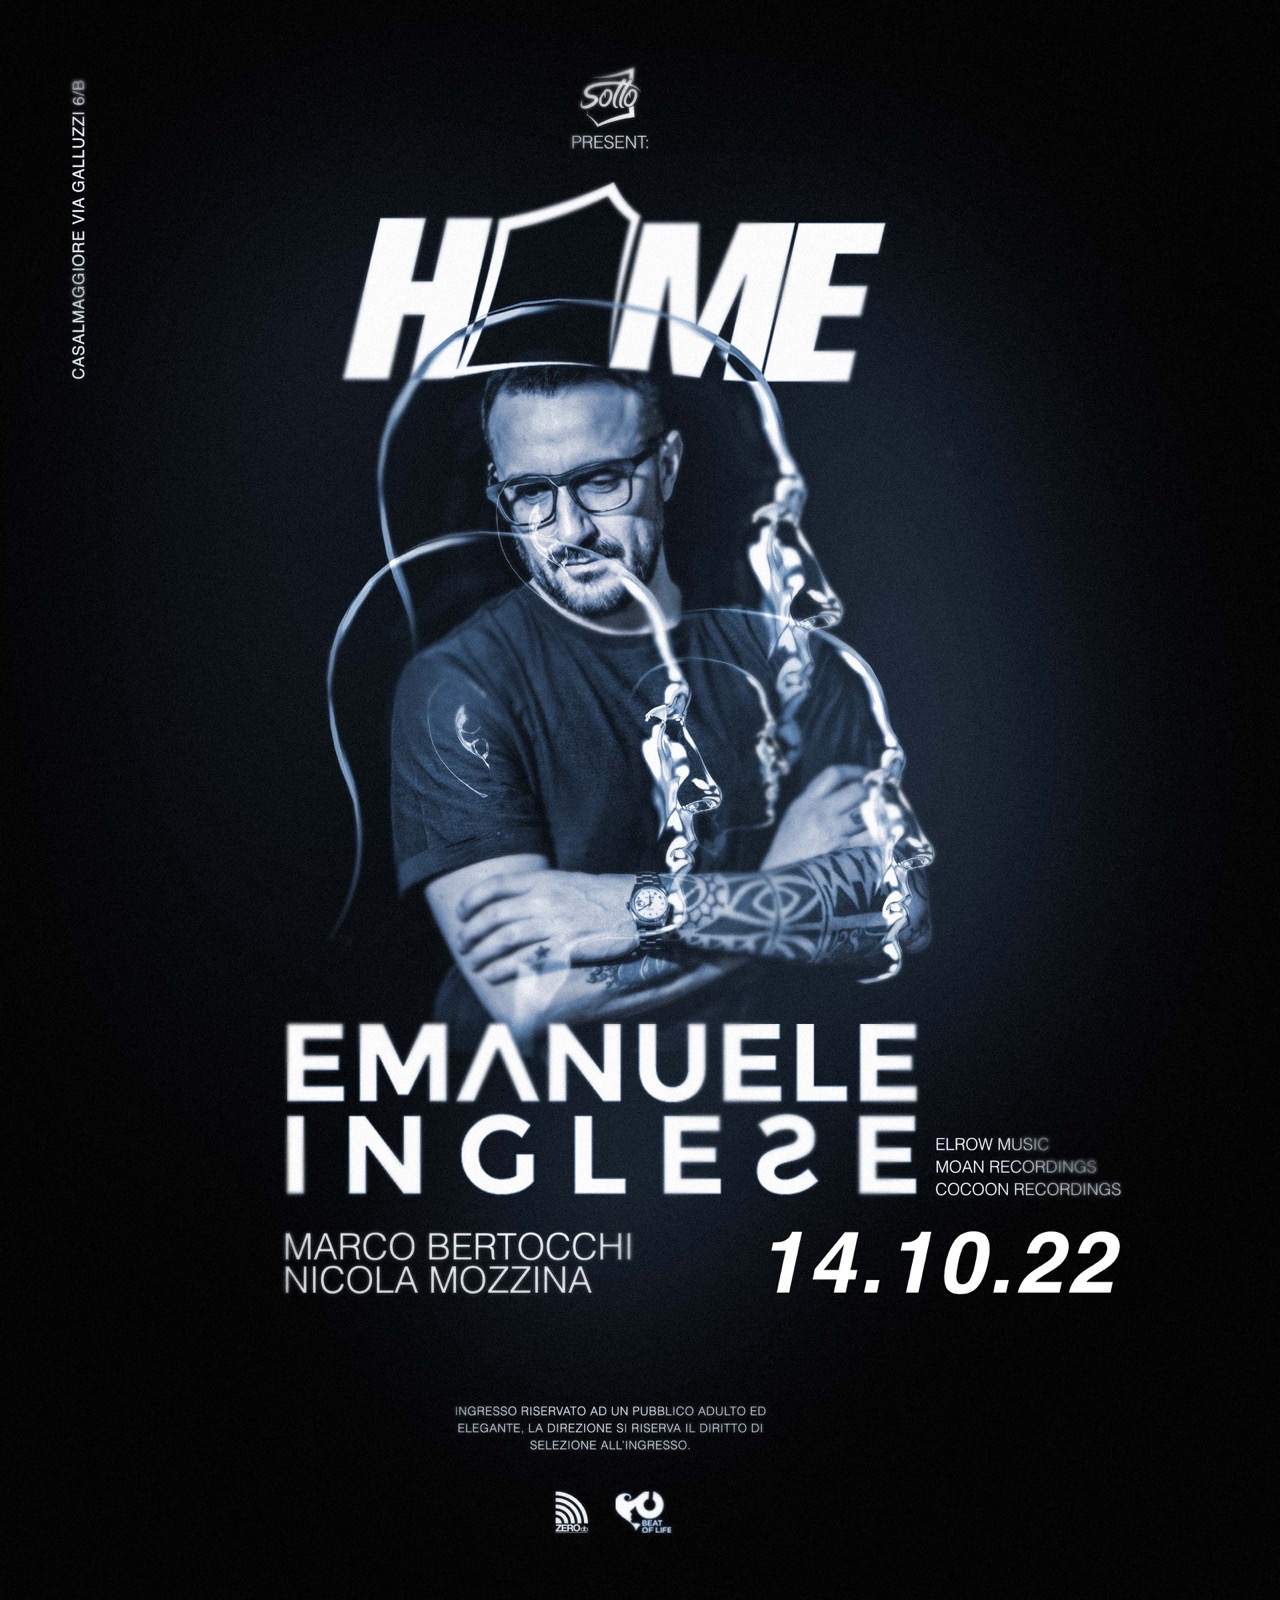 Home opening with Emanuele Inglese - Página frontal